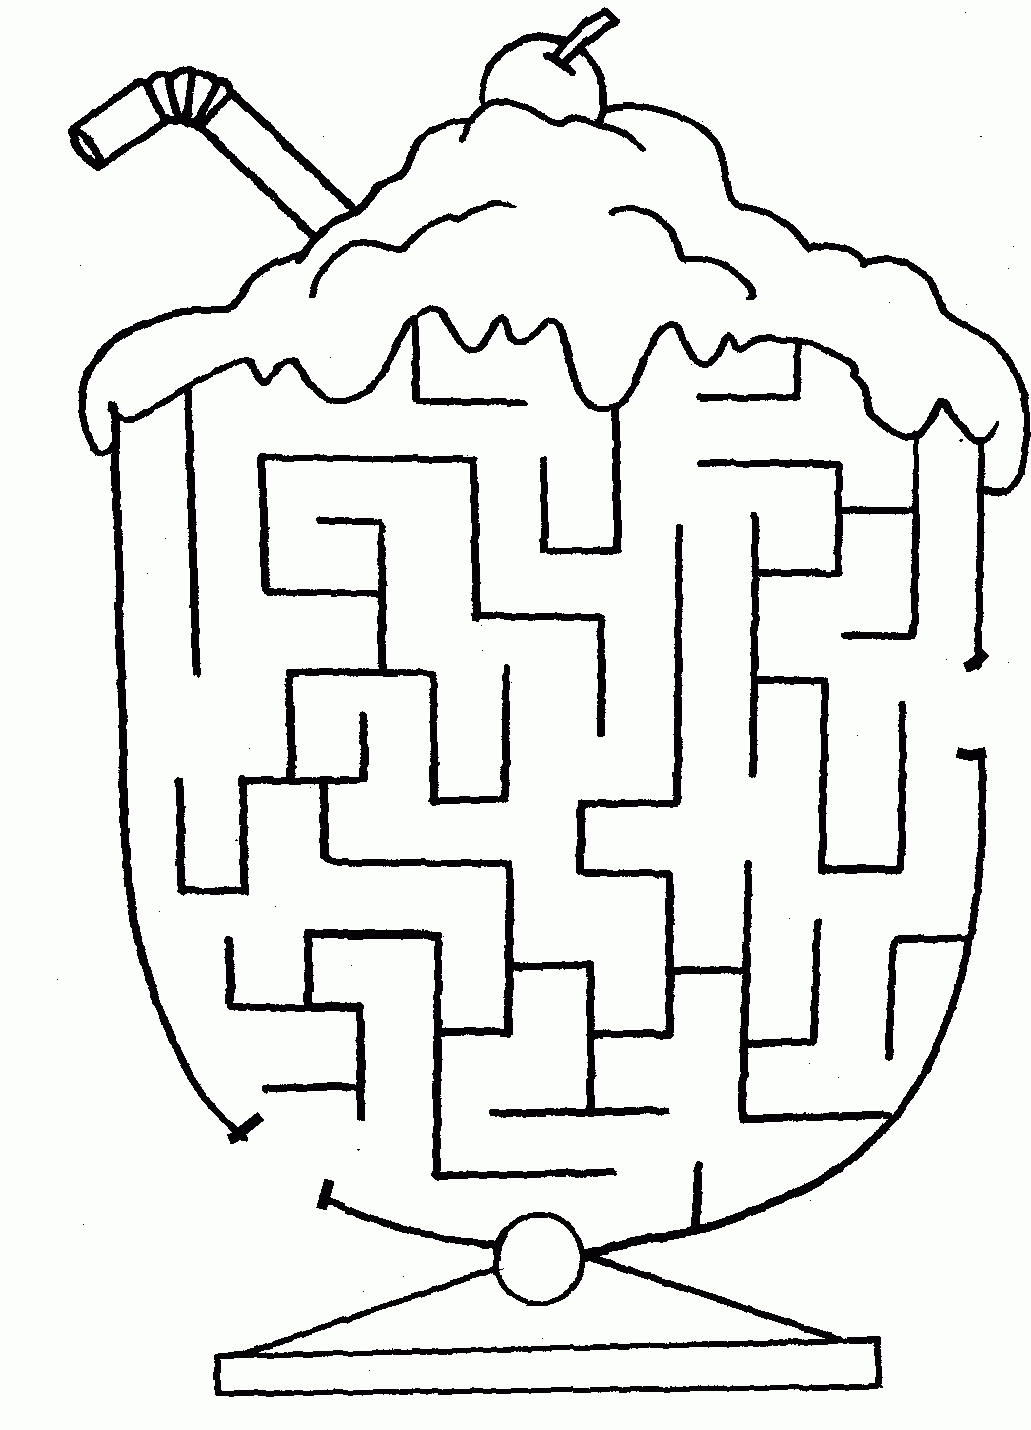 Free Printable Mazes | Ice Cream Coloring Pages, Mazes For Kids within Free Printable Mazes For Kids